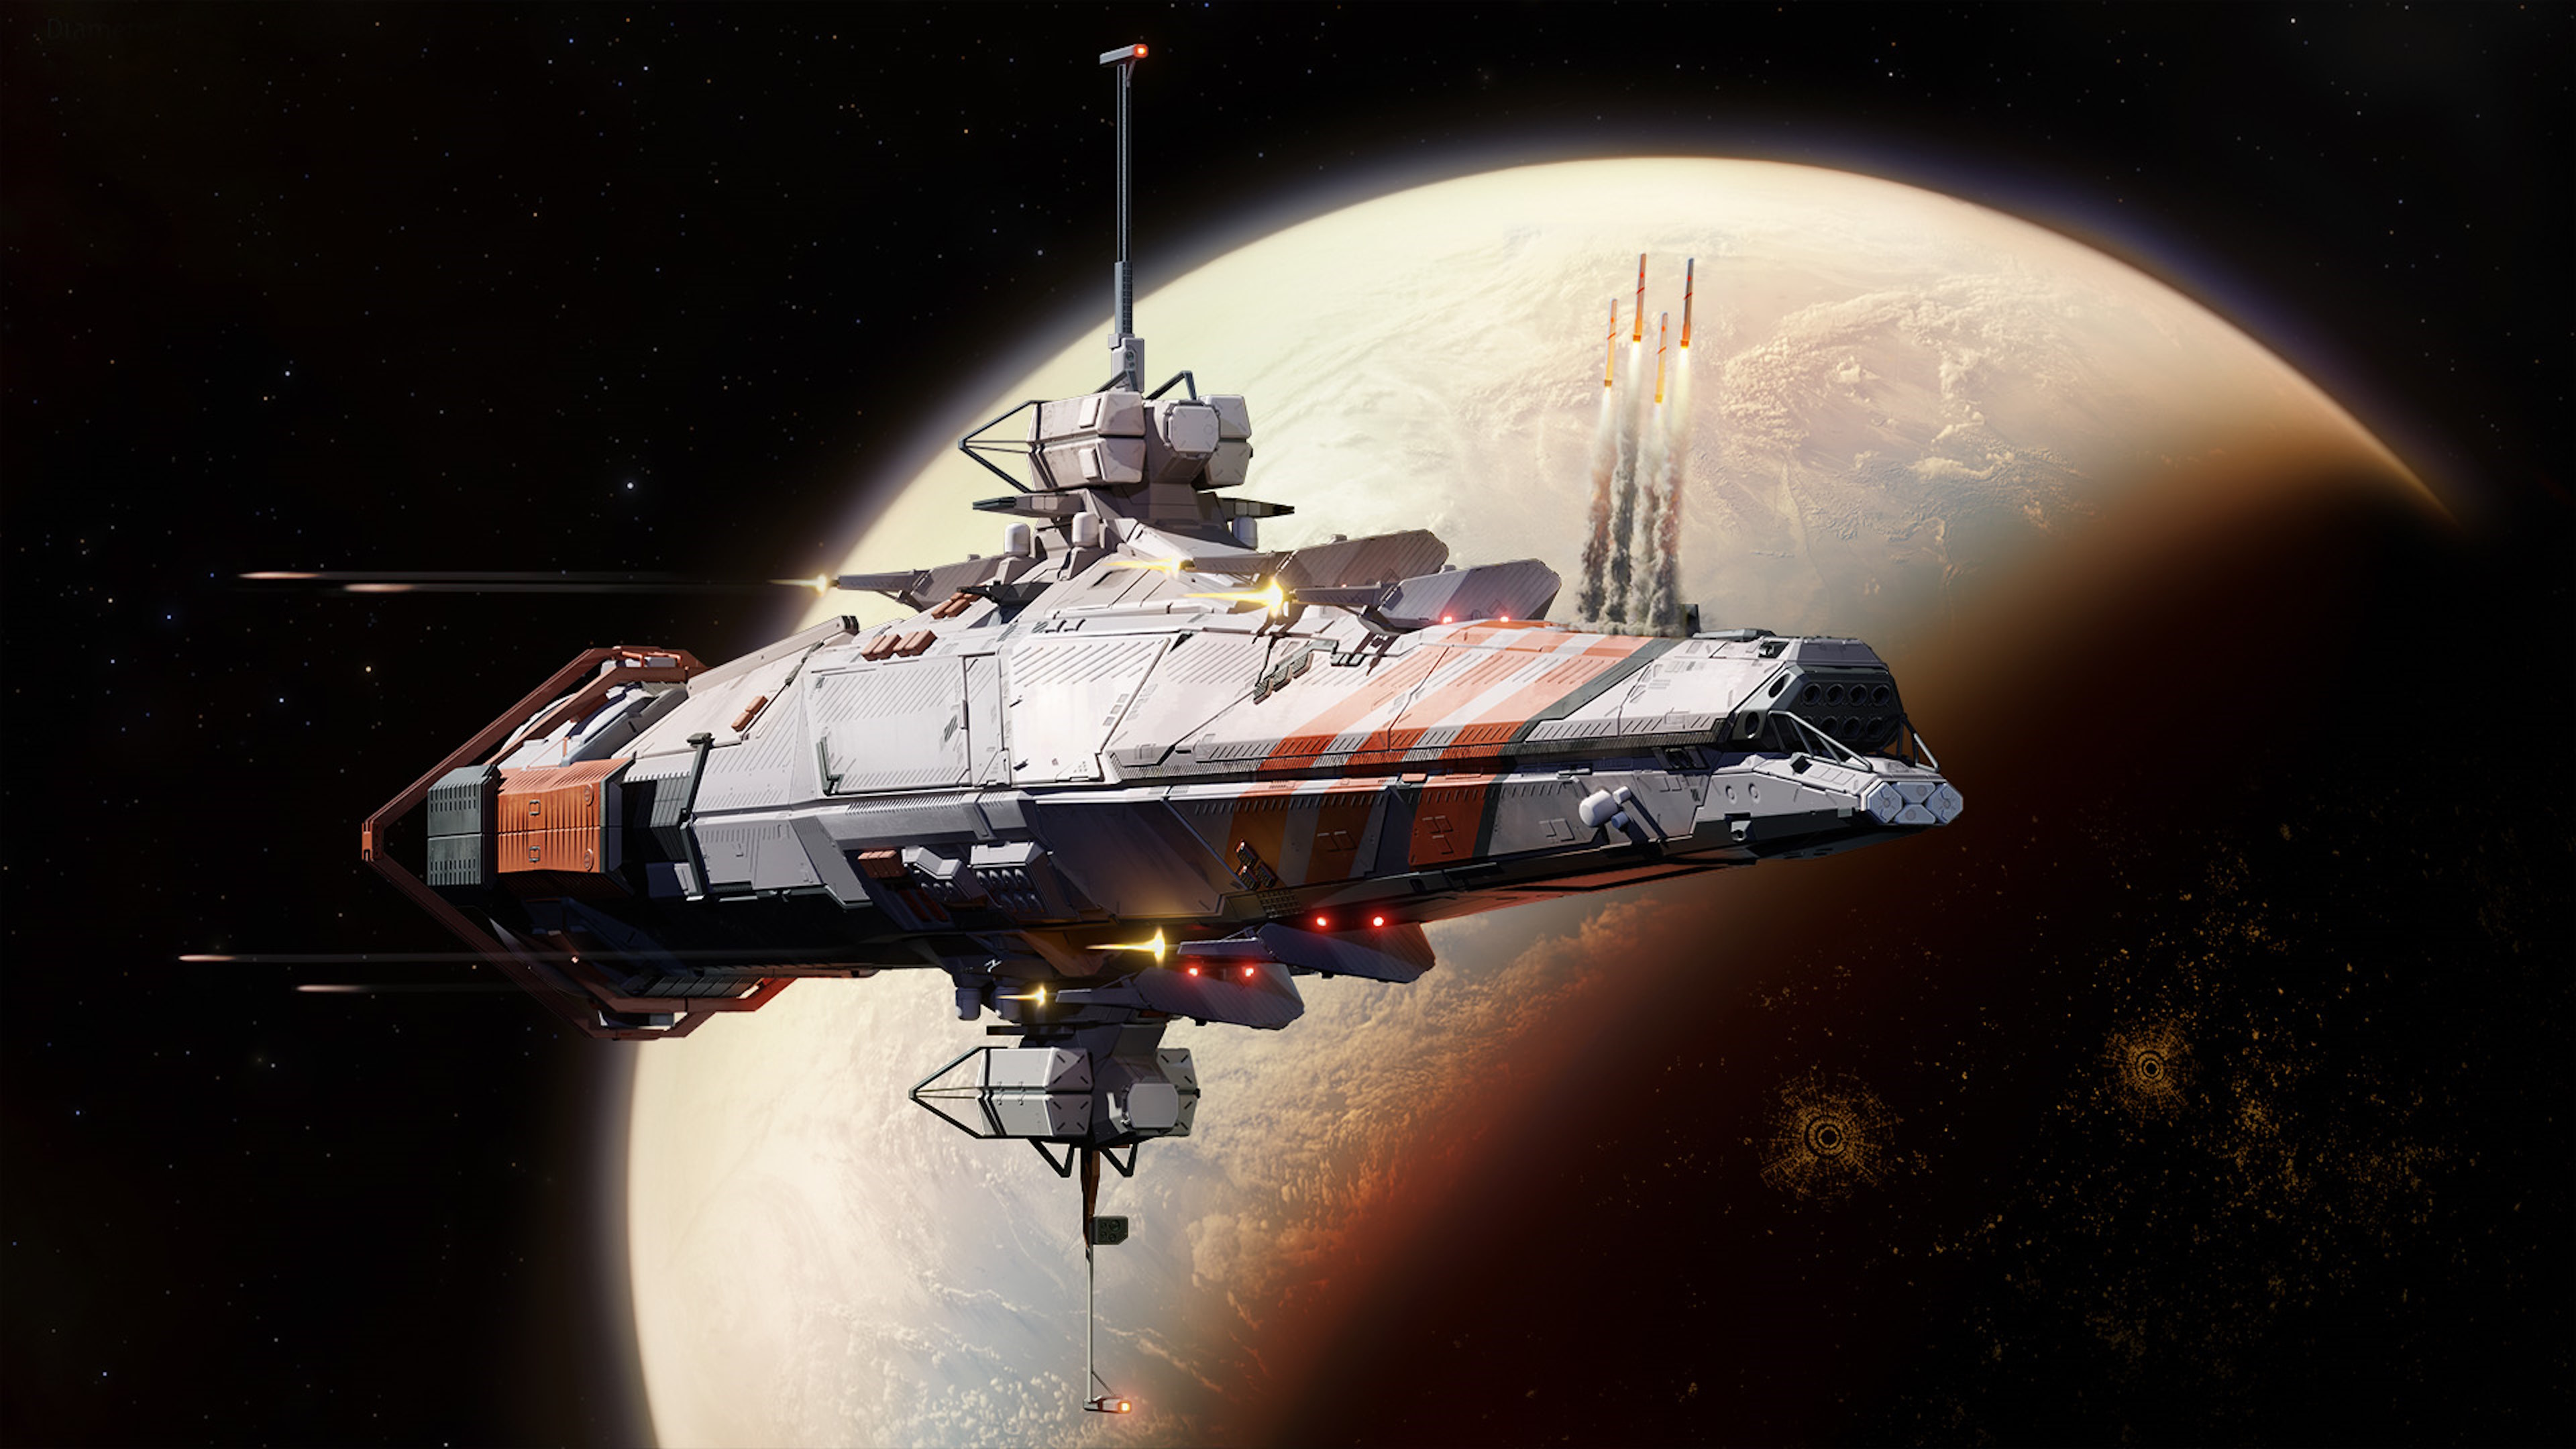 Sci-Fi Games With The Best Space Combat